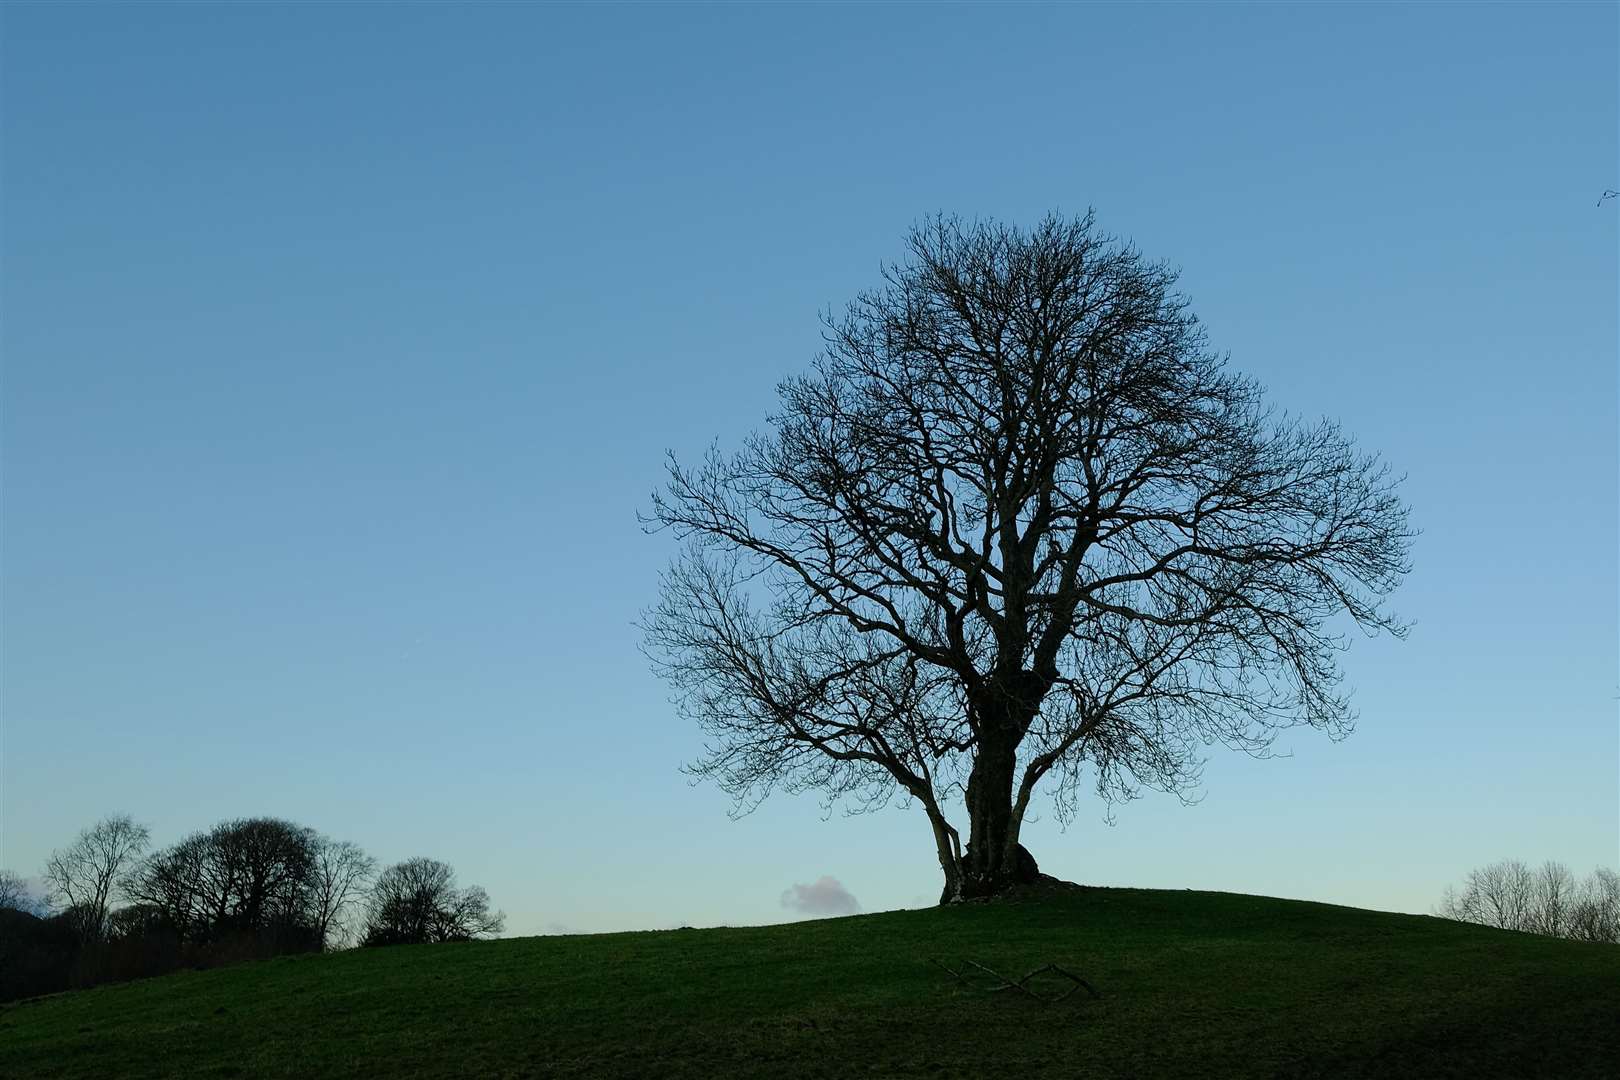 The death of ash trees is expected to change the UK landscape (Peter Tasker/National Trust/PA)